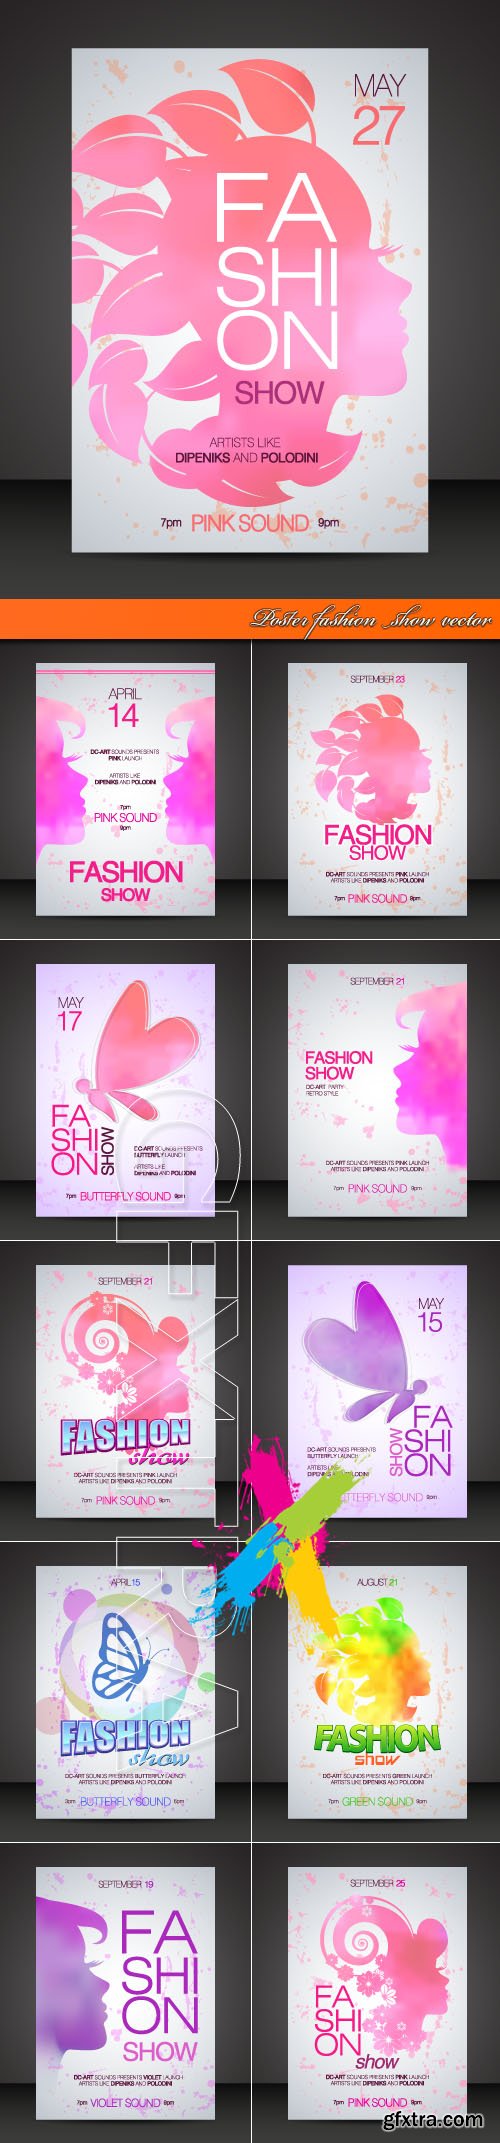 Poster fashion show vector